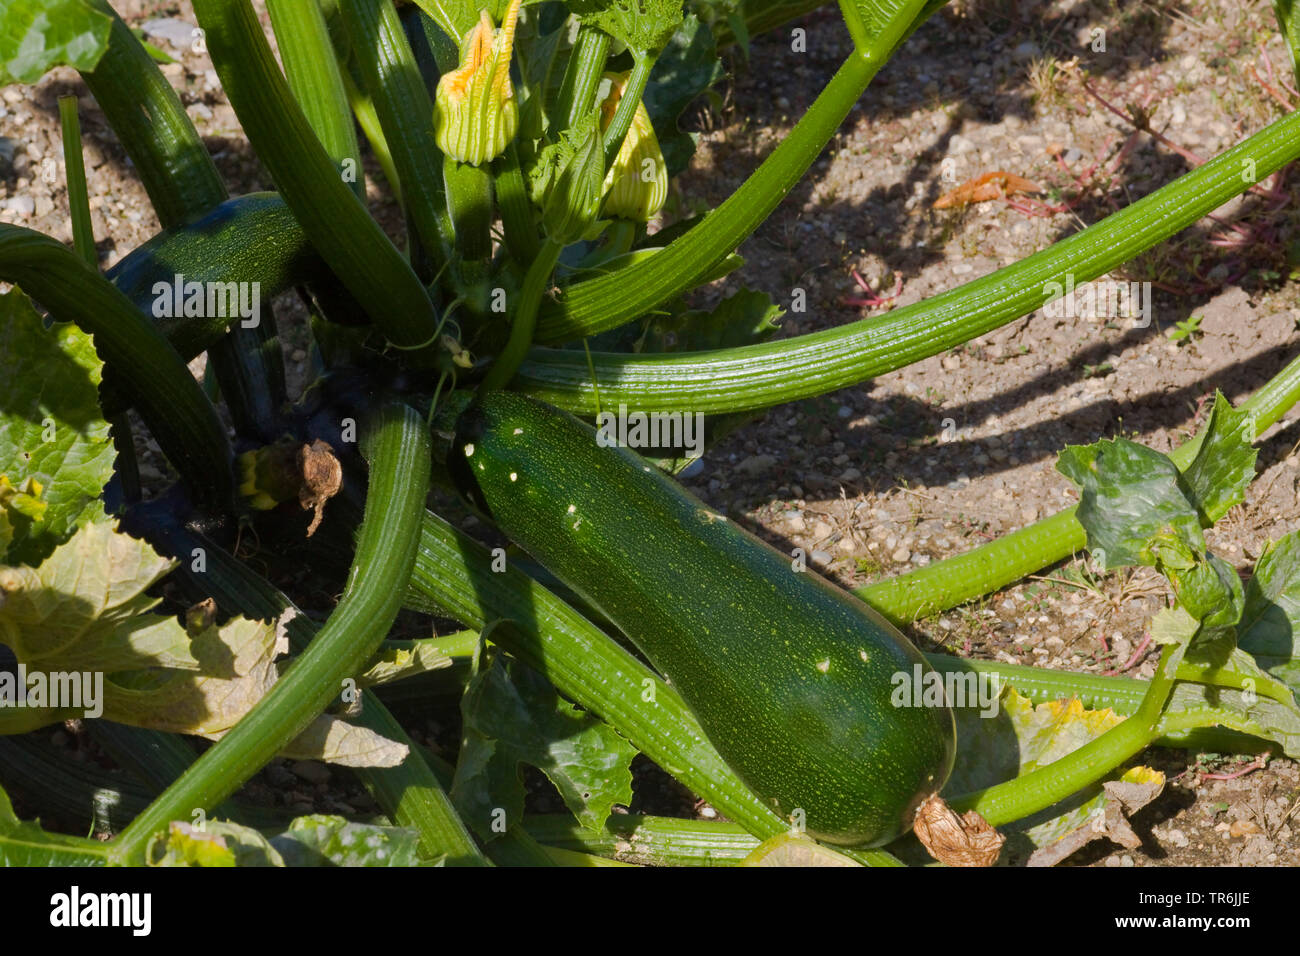 courgette, zucchini (Cucurbita pepo var. giromontiia, Cucurbita pepo subsp. pepo convar. giromontiina), plant with fruit, Germany Stock Photo